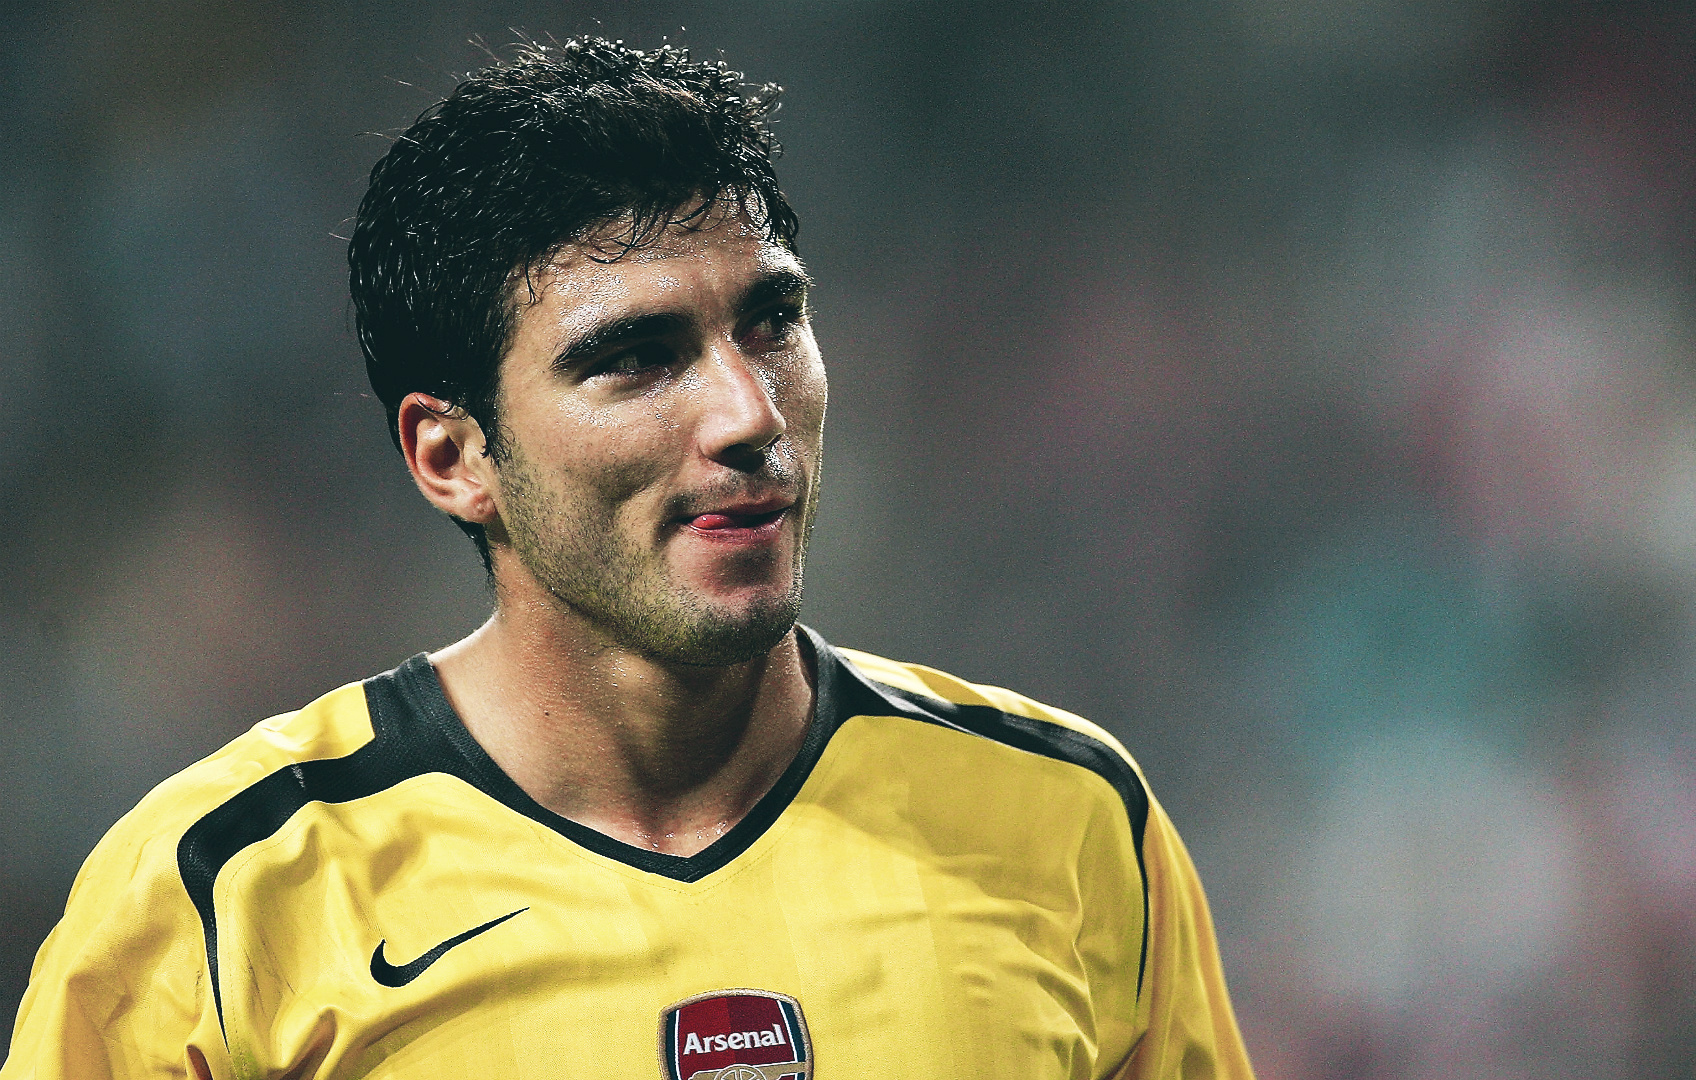 José Antonio Reyes: the man who gave us too few but spectacular moments of genius